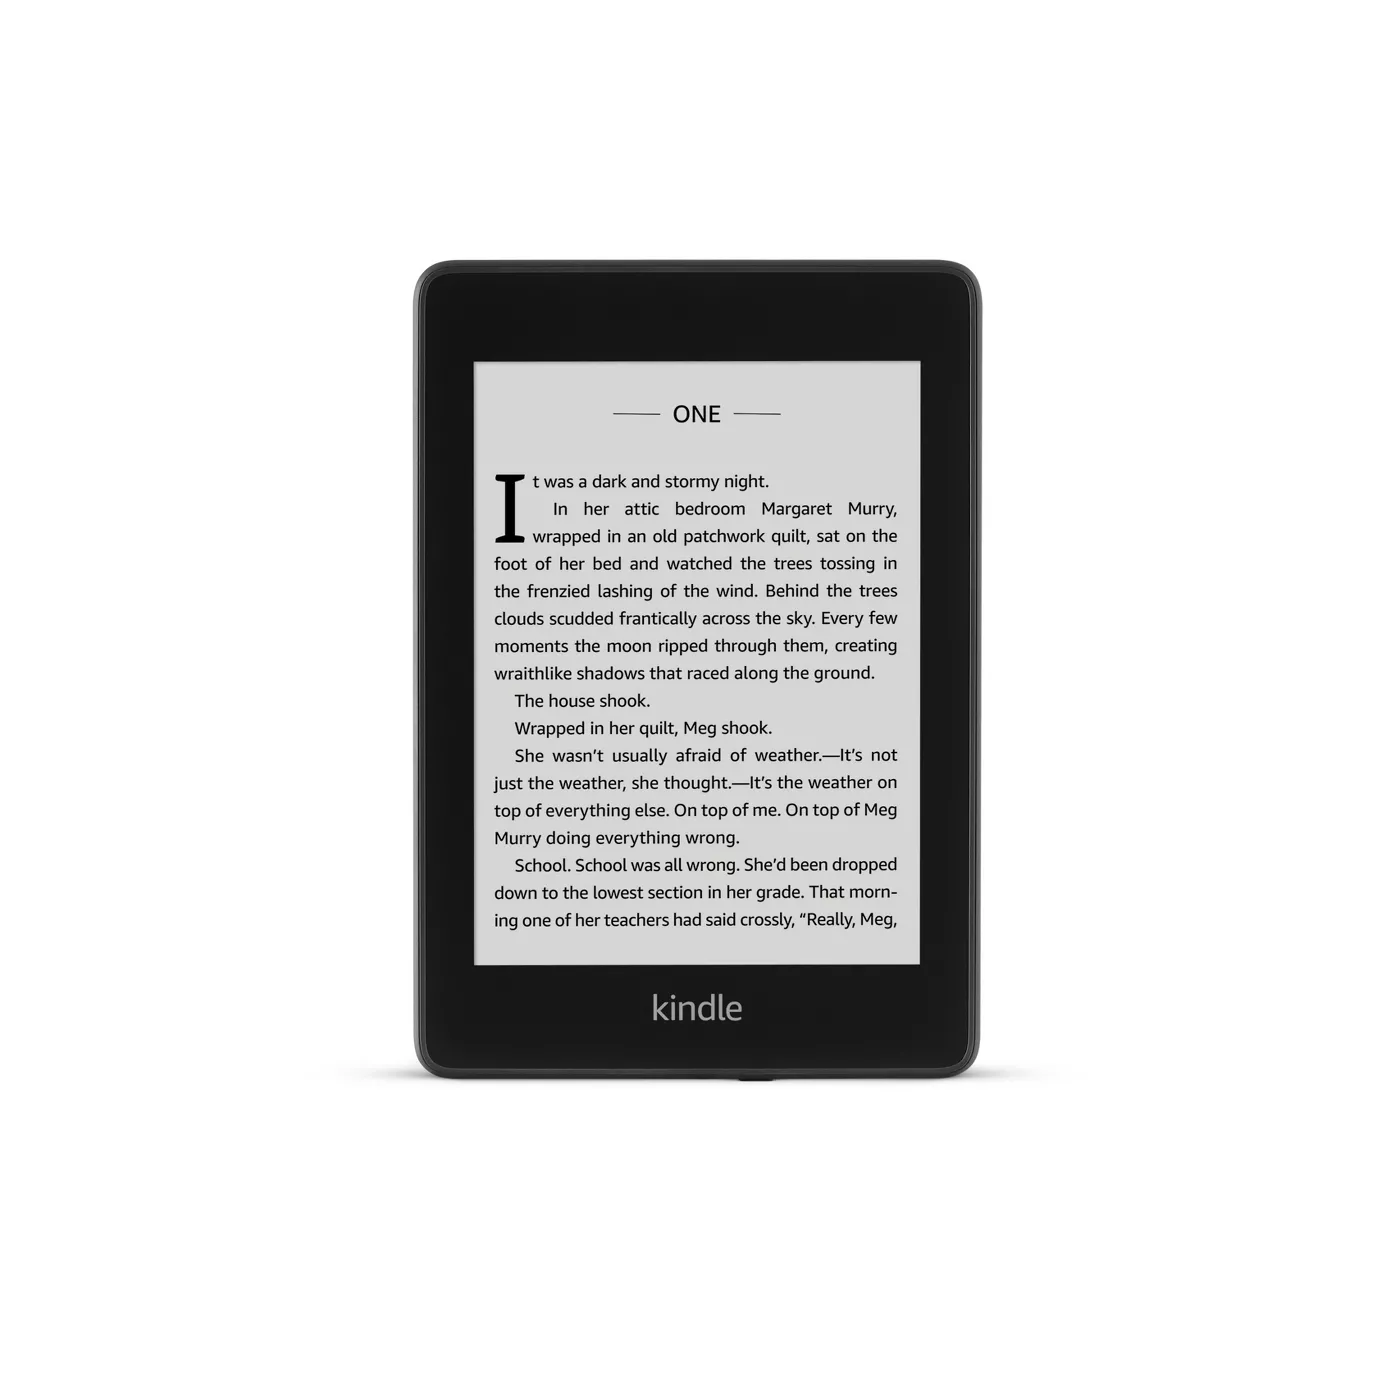 Amazon Kindle Paperwhite (10th Generation, 2018 Release) - Black. Click through to find Humor, Gifts for Mamas and Grads + Books to Keep You Company!